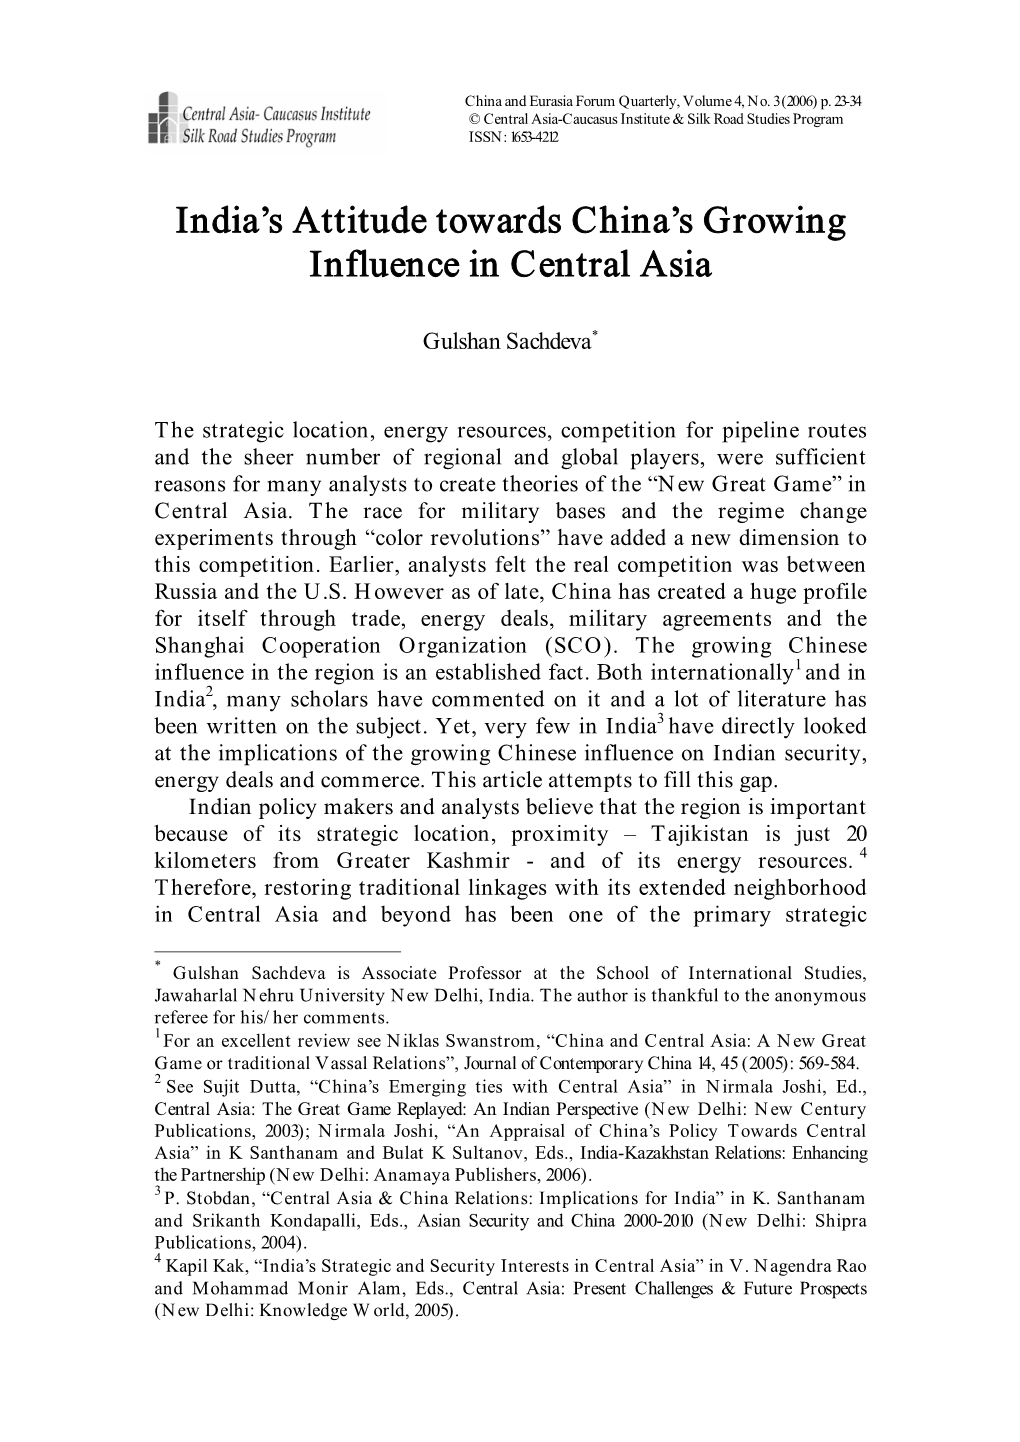 India's Attitude Towards China's Growing Influence in Central Asia